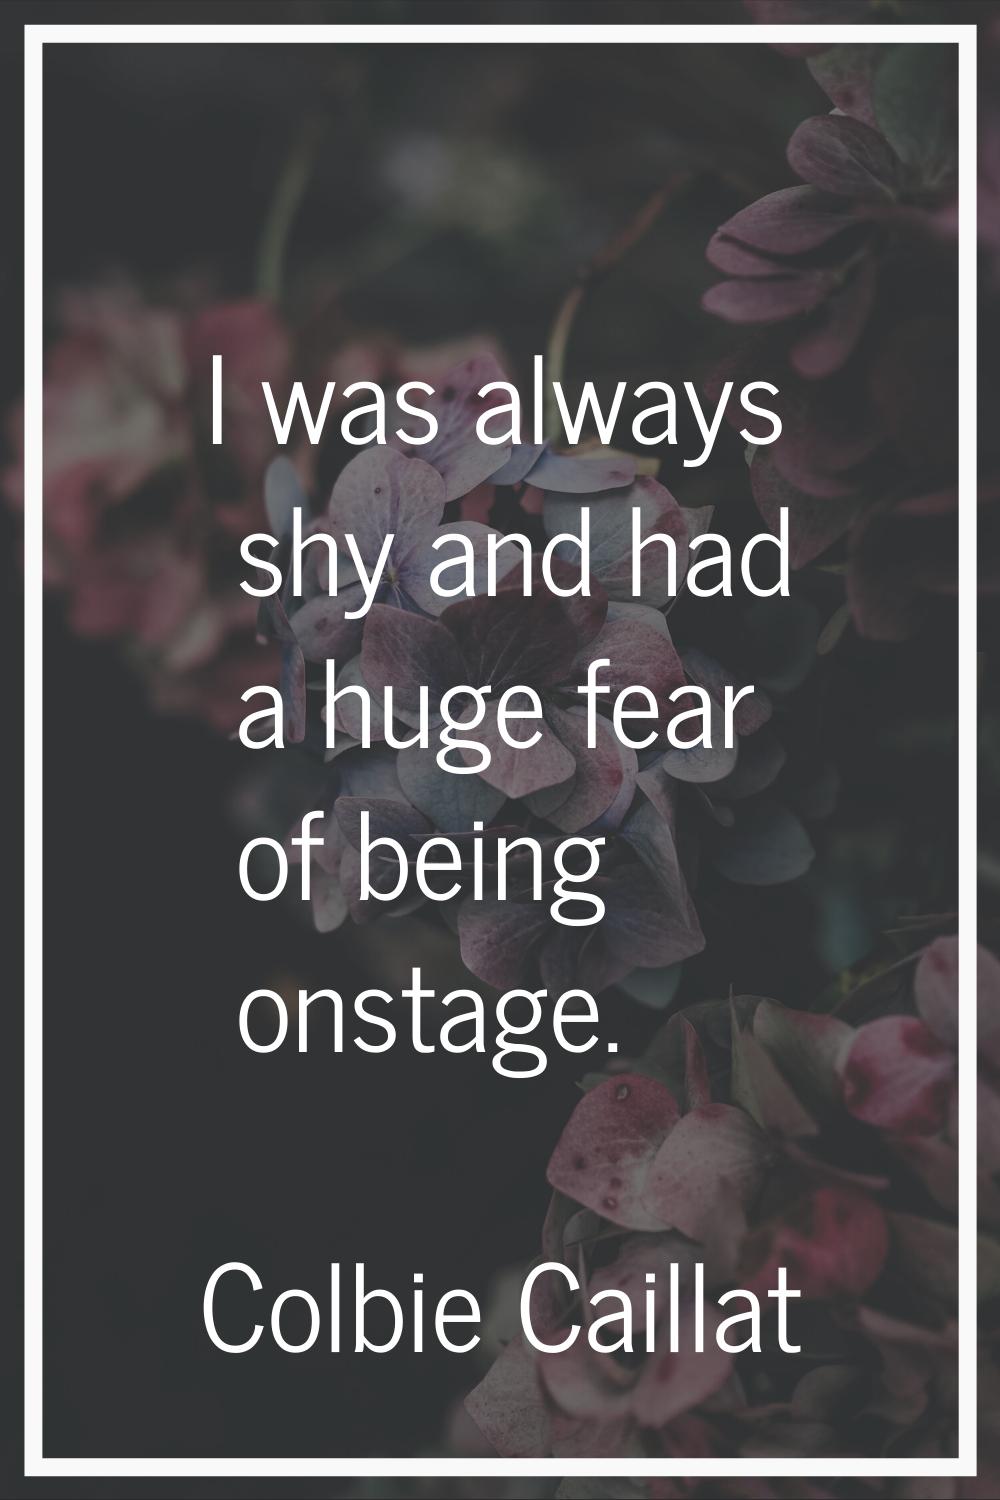 I was always shy and had a huge fear of being onstage.